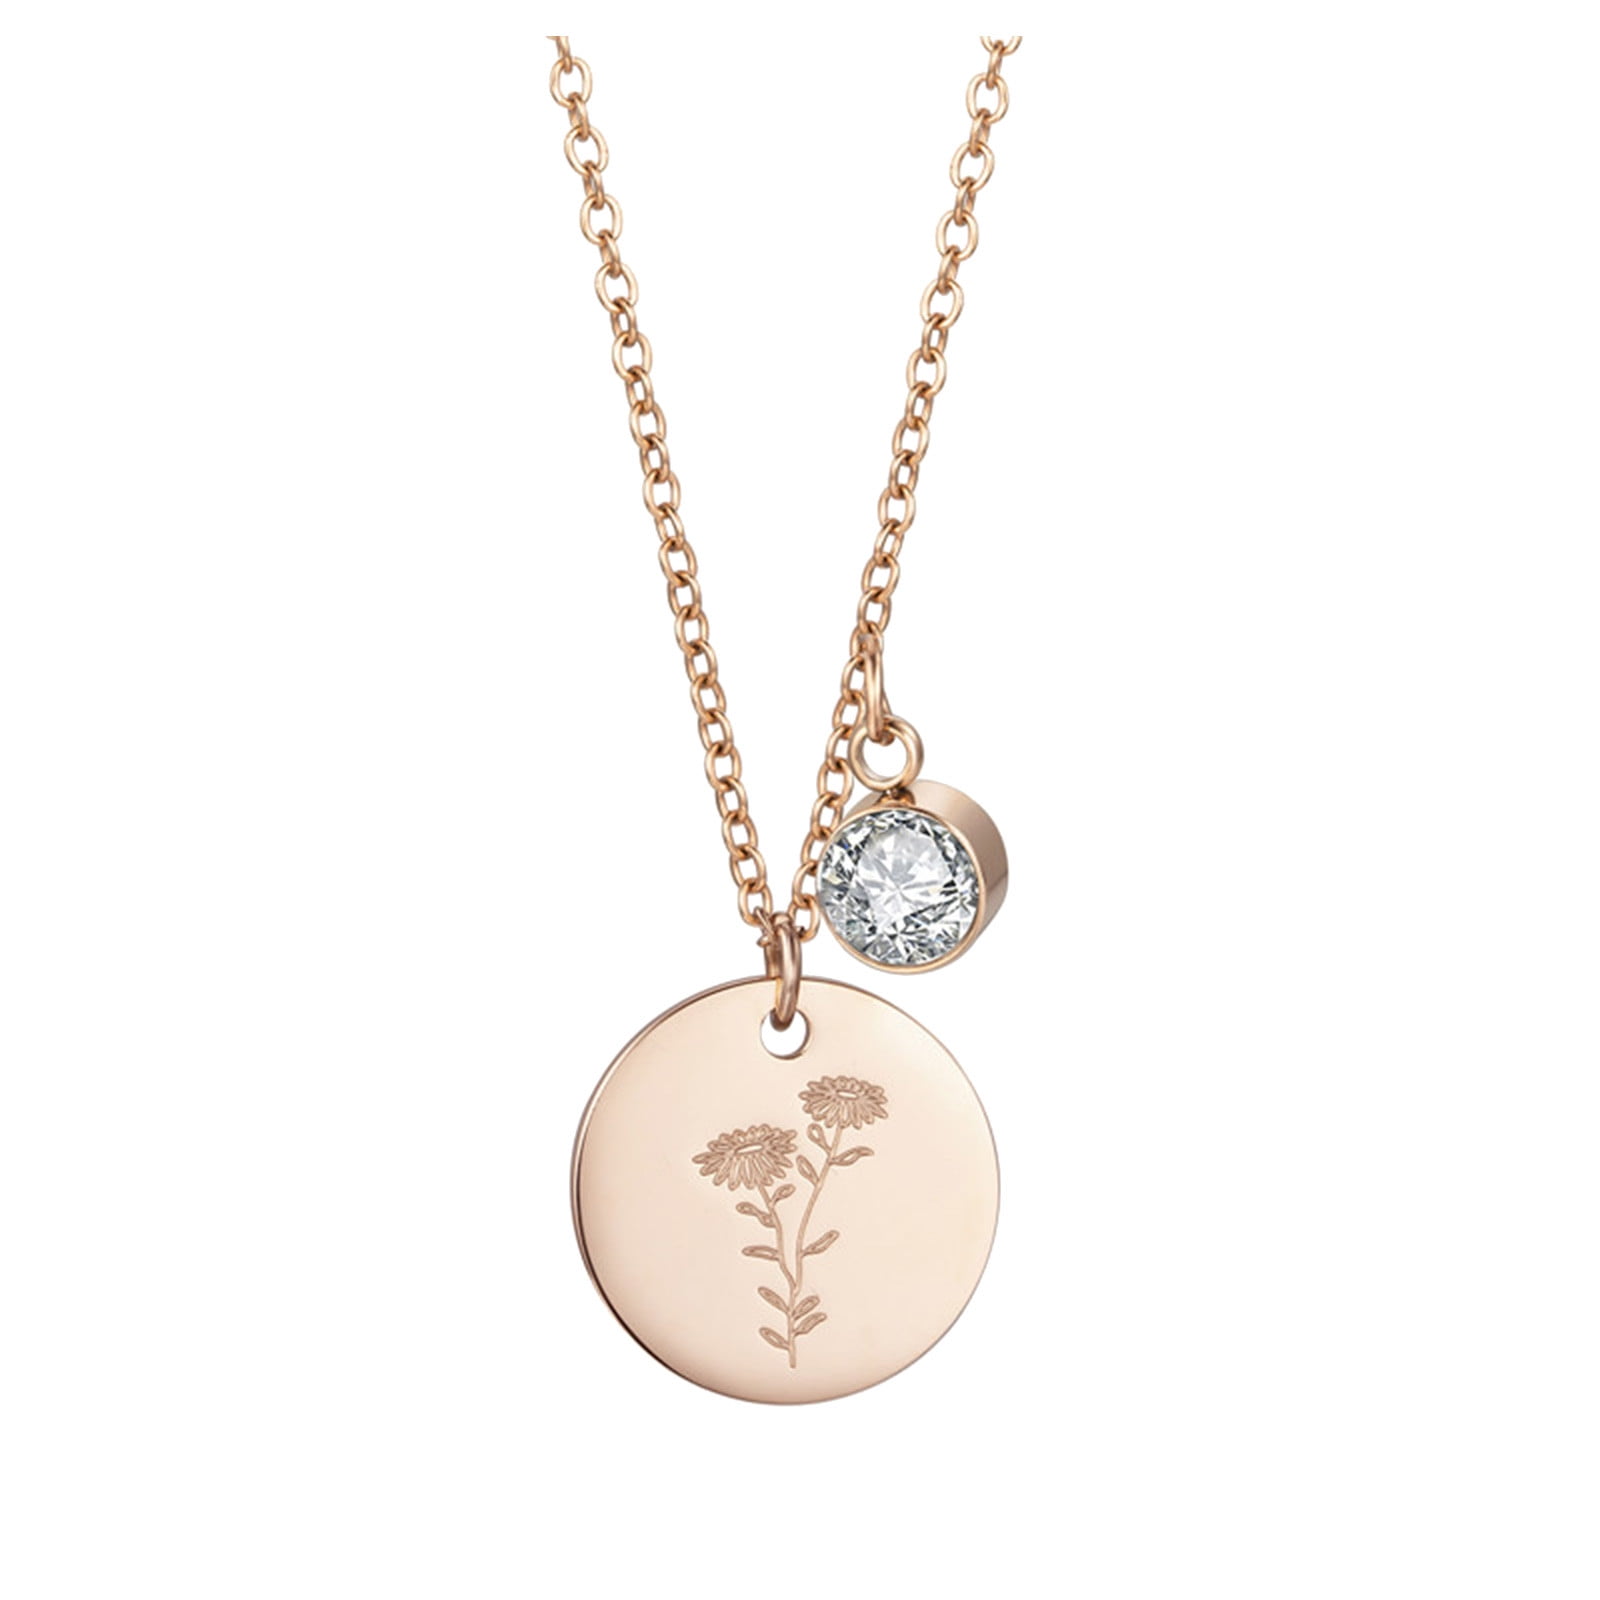 Details about   Dainty Daisy Pendant Sterling Silver 925 Hallmark Gold Plate All Chain Lengths 